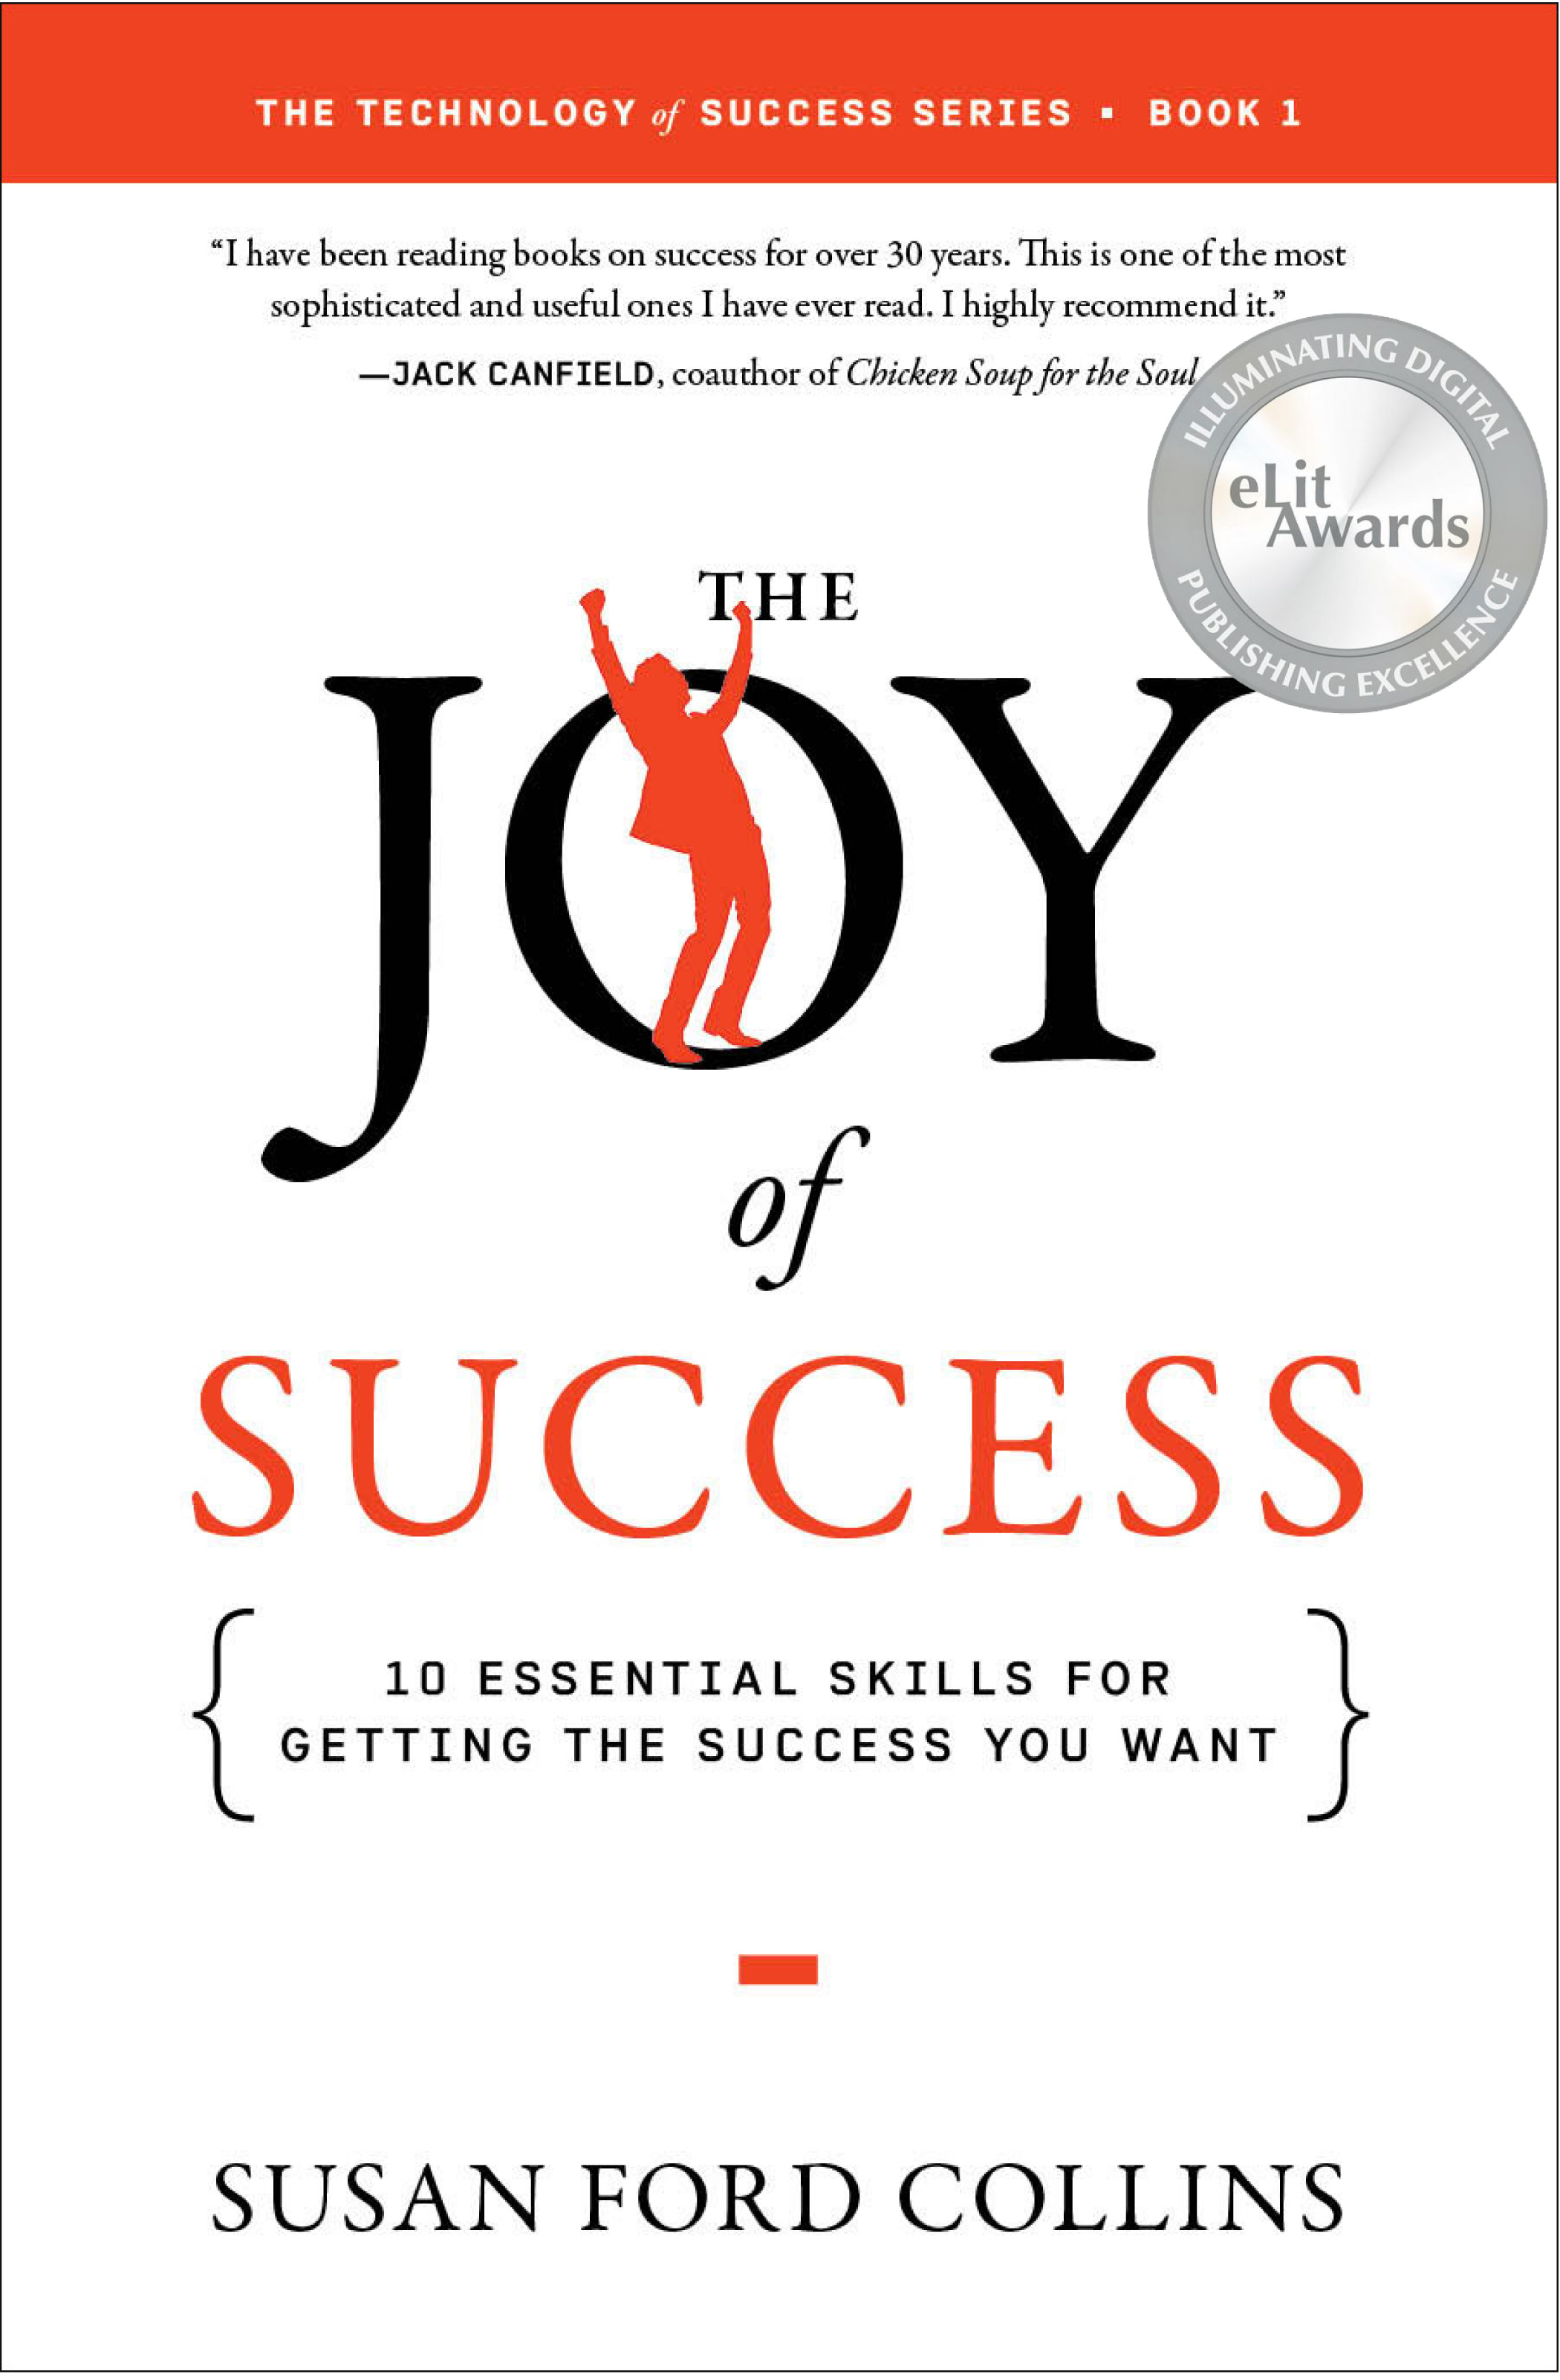 The Joy of Success by Susan Ford Collins